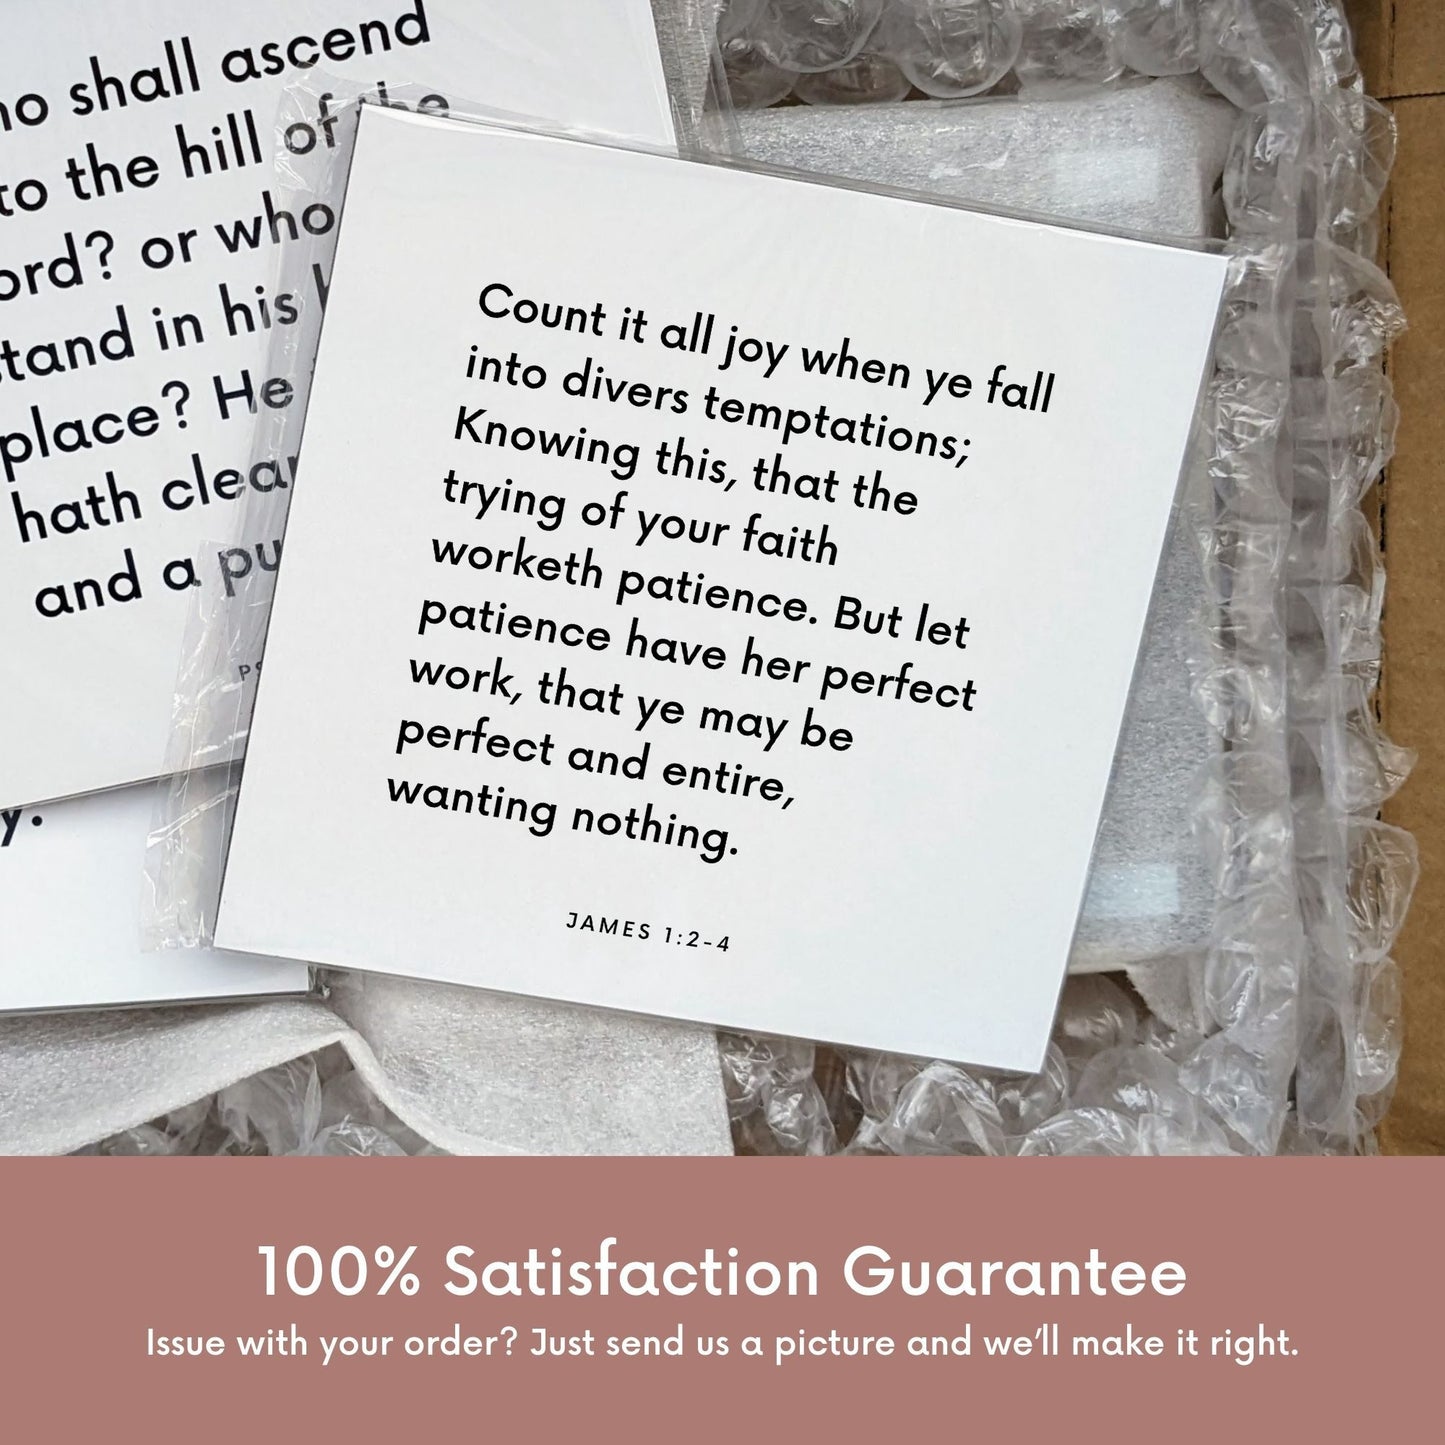 Shipping materials for scripture tile of James 1:2-4 - "Count it all joy when ye fall into divers temptations"